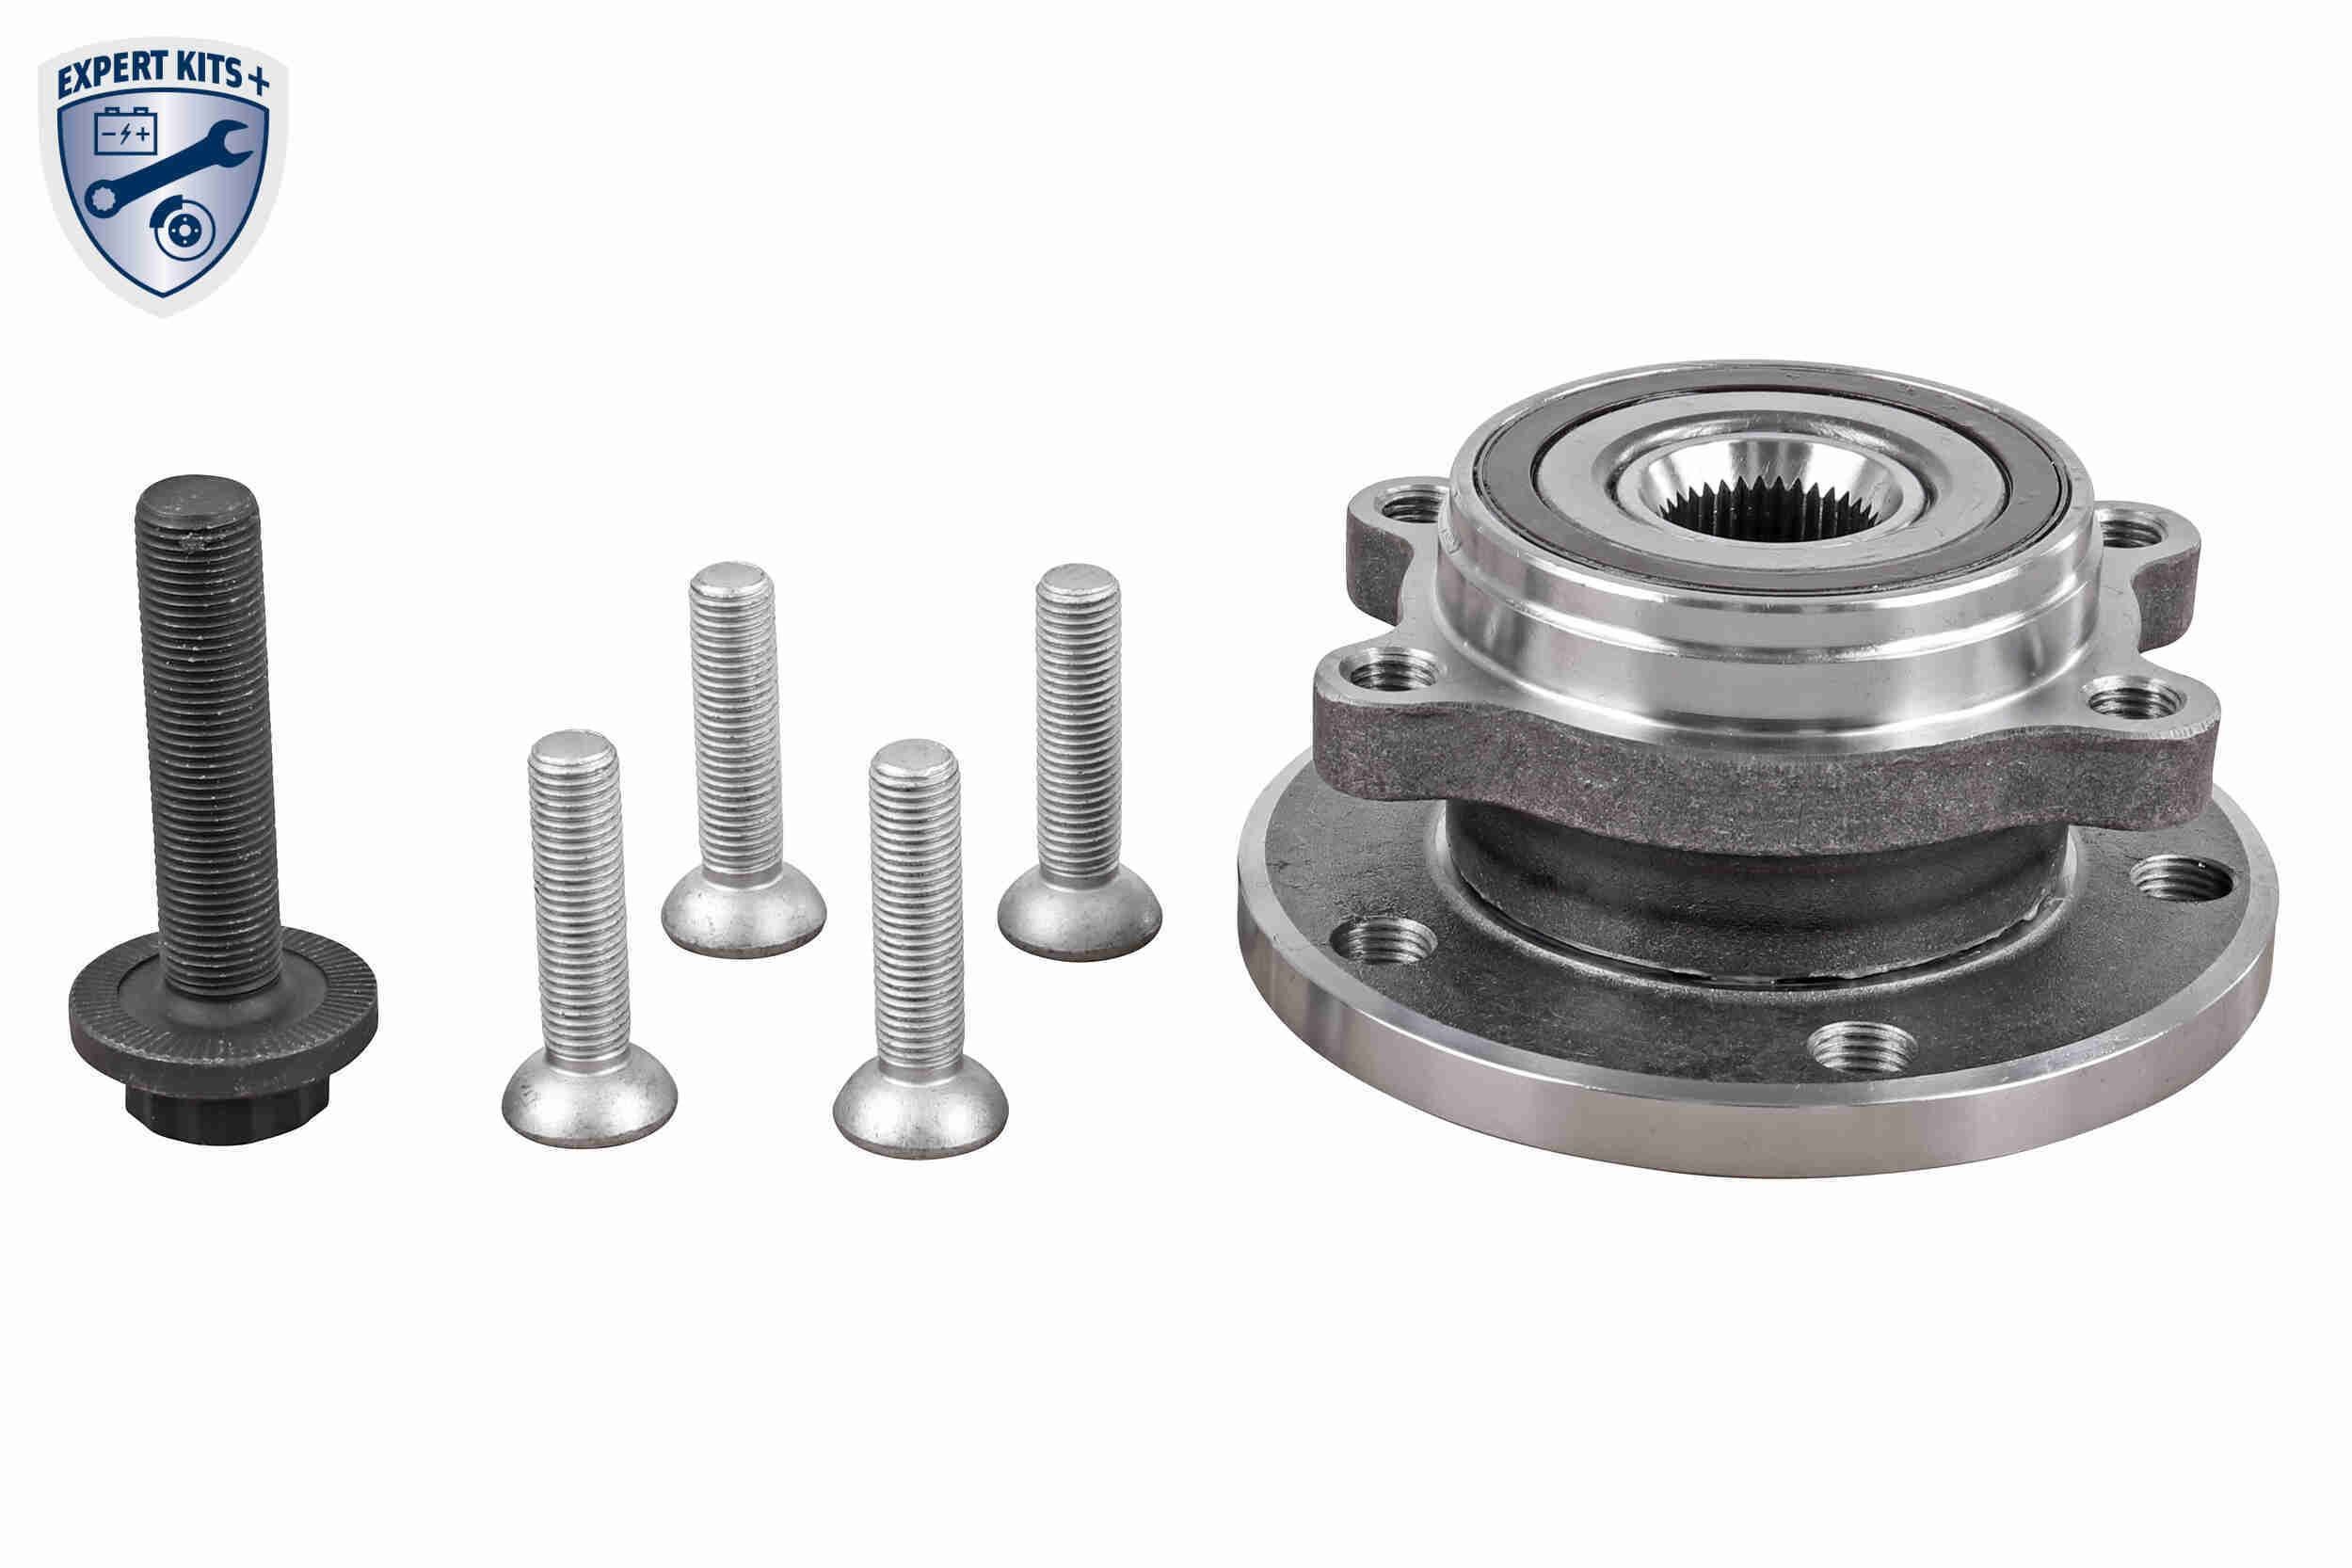 V10-0497 VAICO Wheel hub assembly JAGUAR Front Axle, EXPERT KITS +, with integrated magnetic sensor ring, 136,5 mm